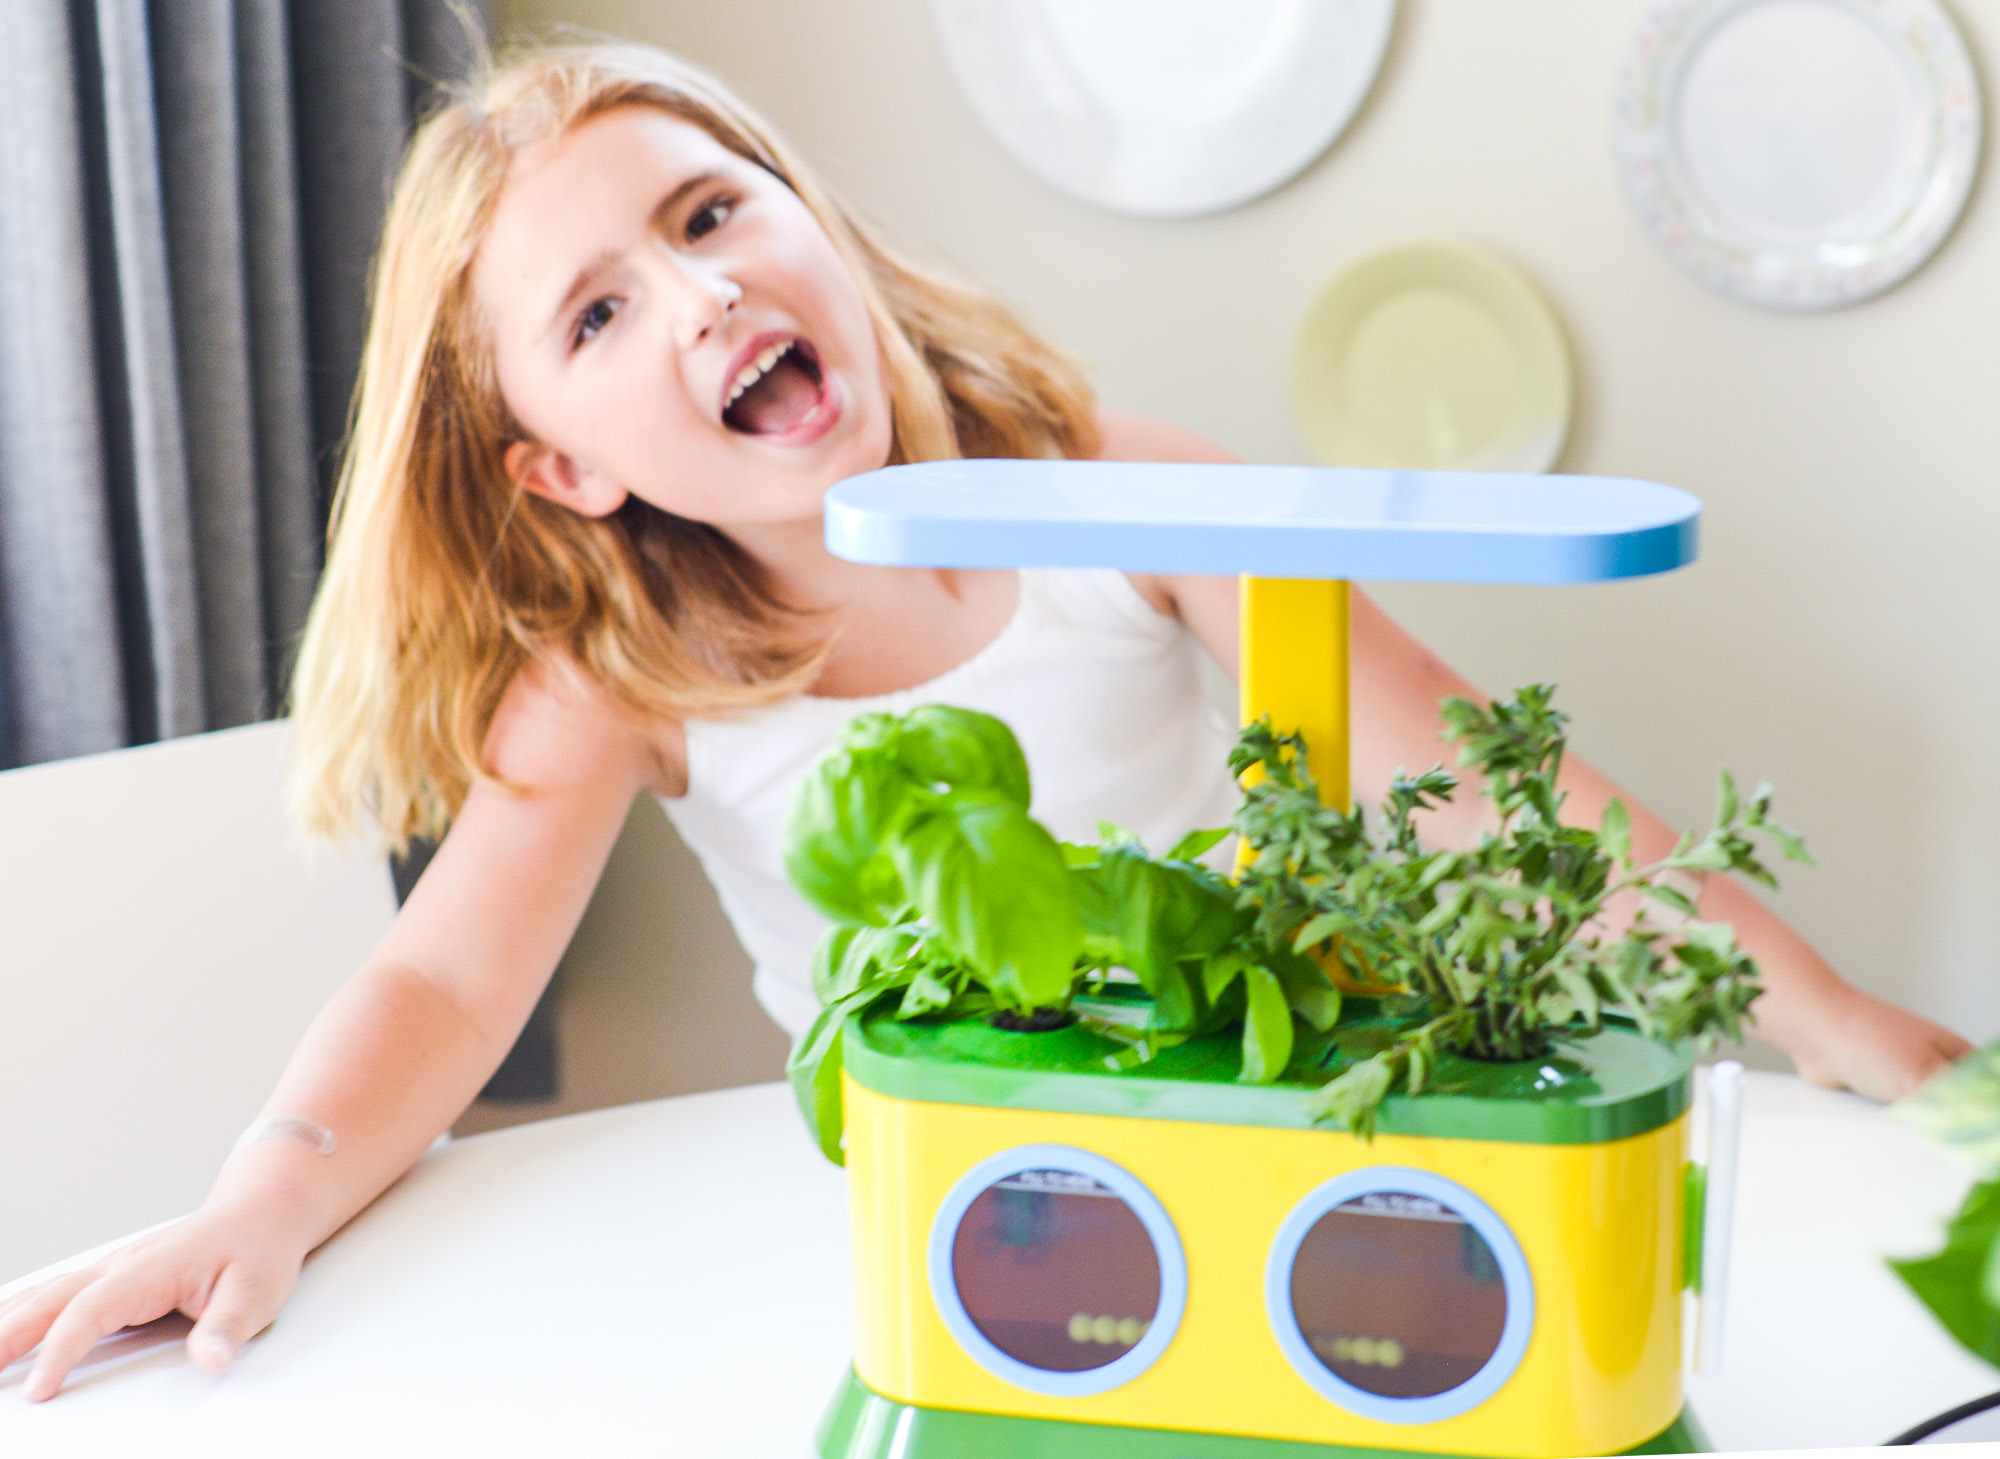 A Genius Gardening Project You (And Your Kids) Will Love